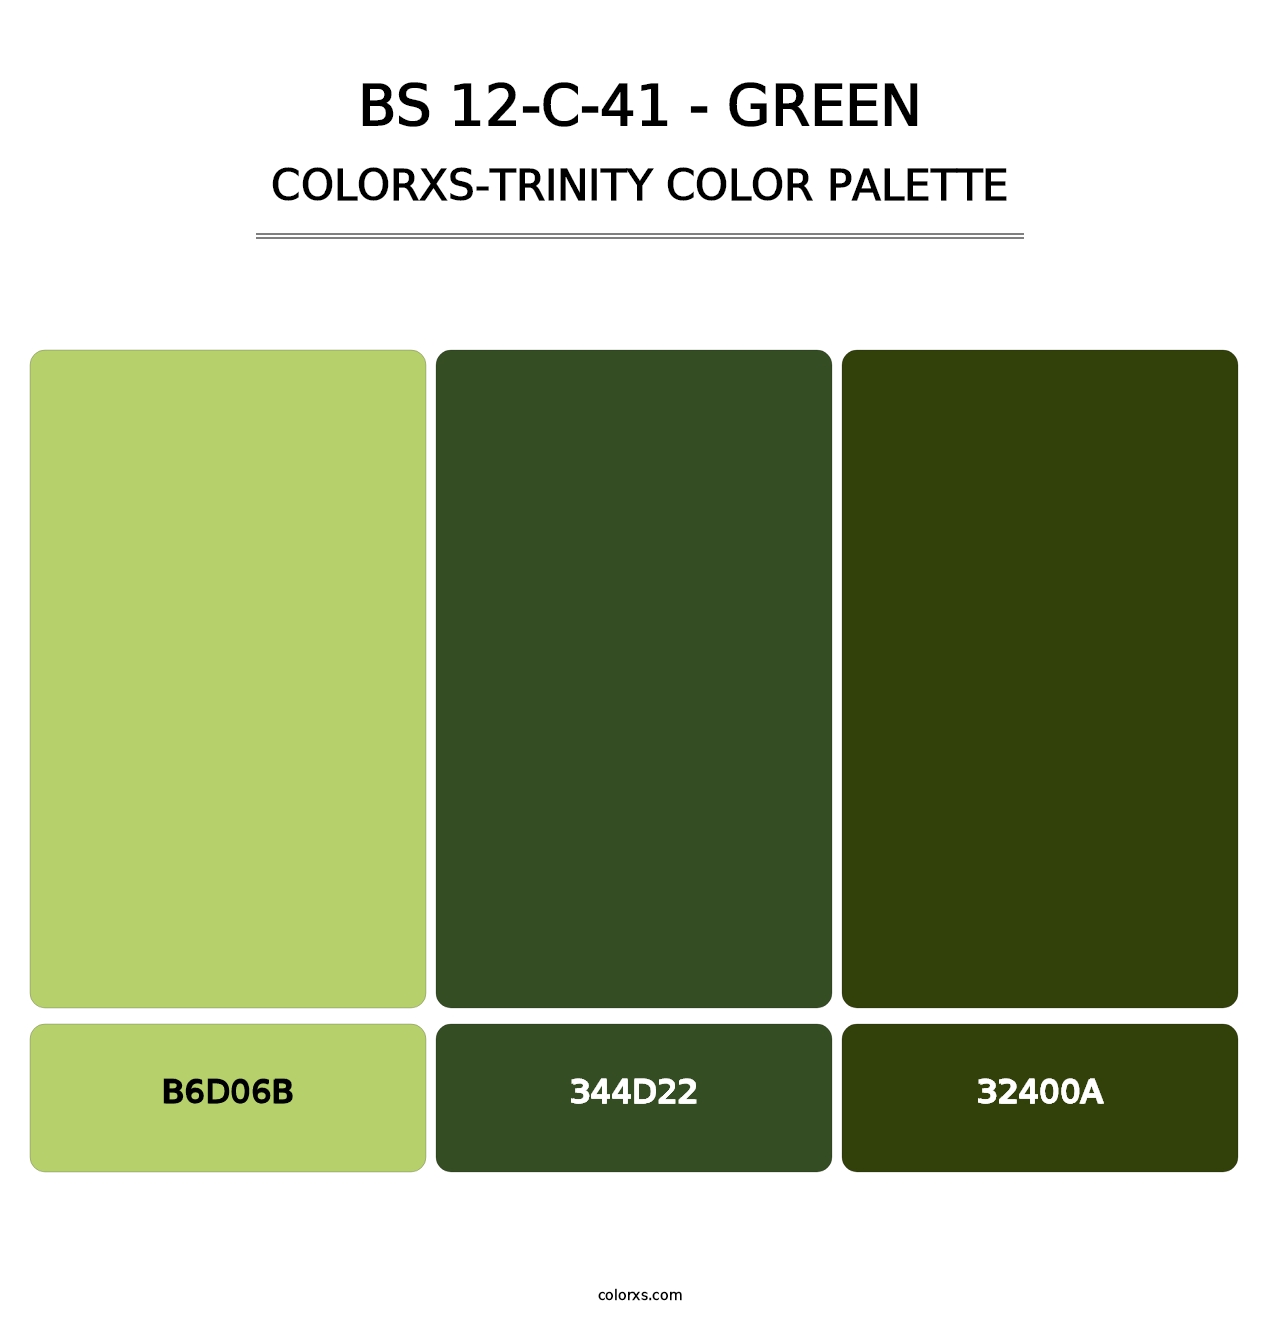 BS 12-C-41 - Green - Colorxs Trinity Palette